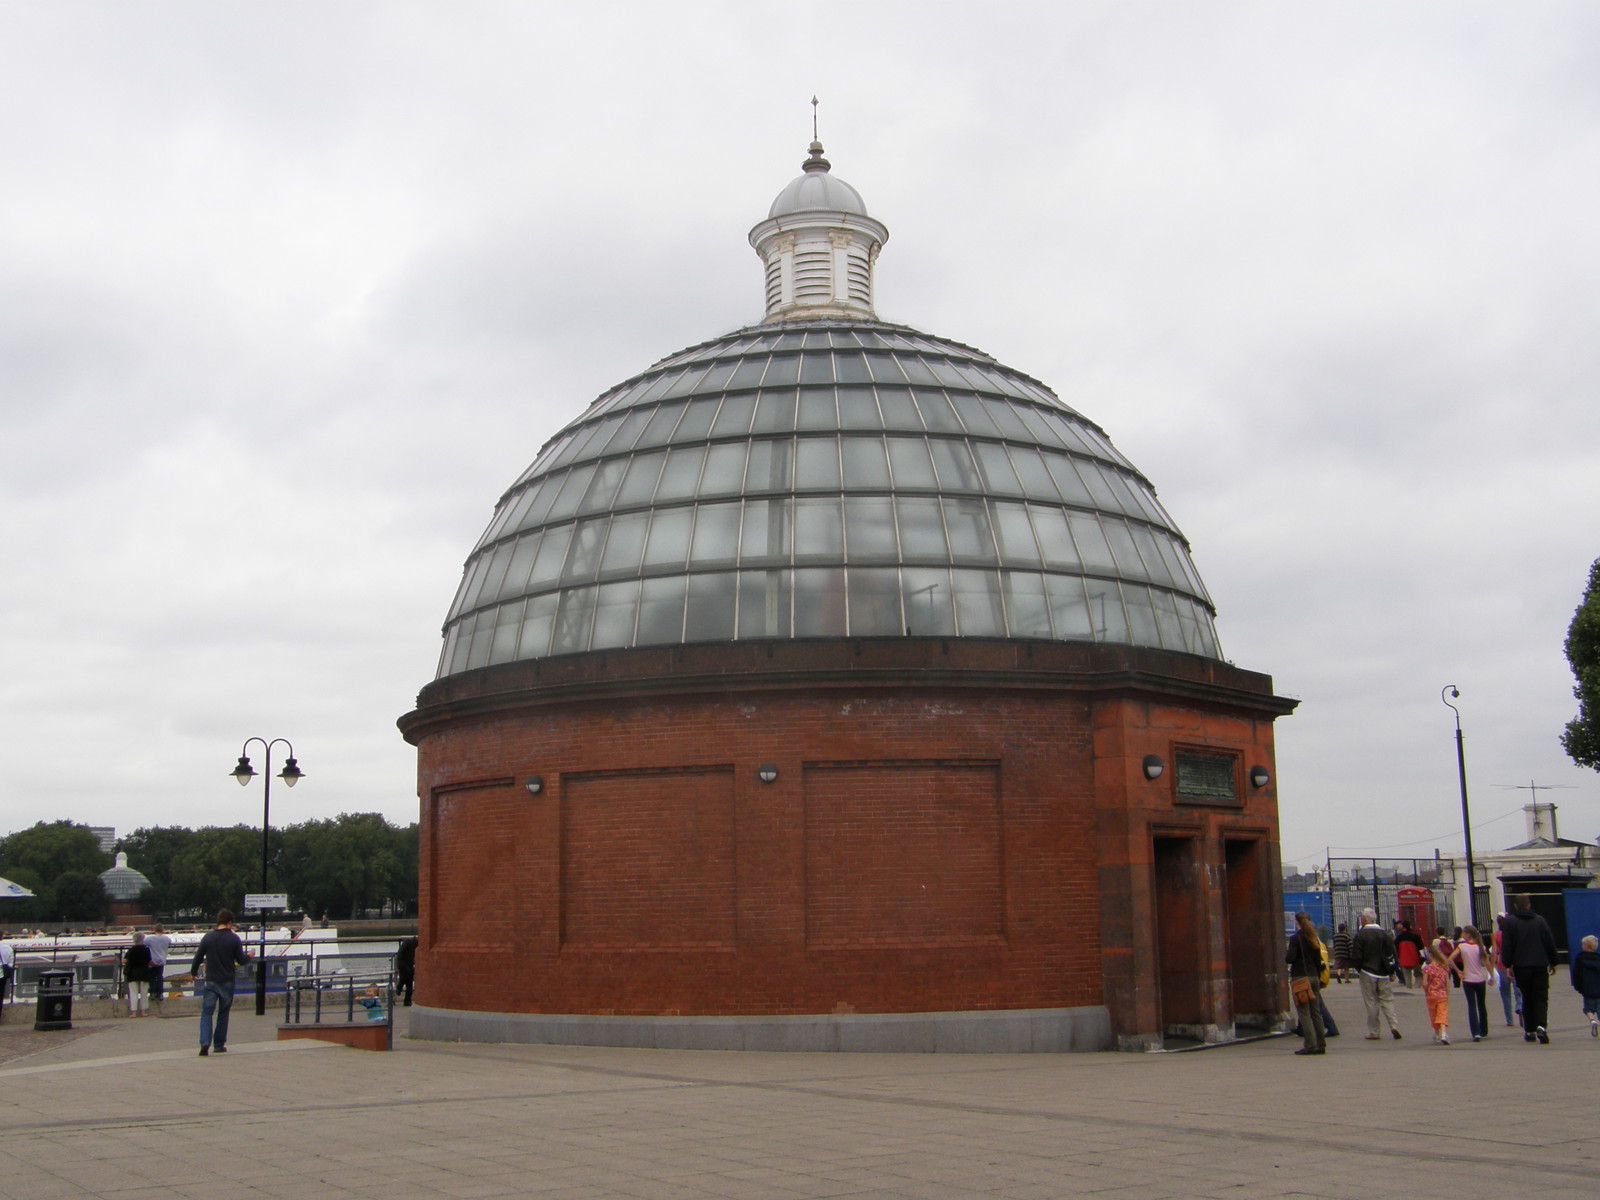 The southern entrance to the Greenwich Foot Tunnel